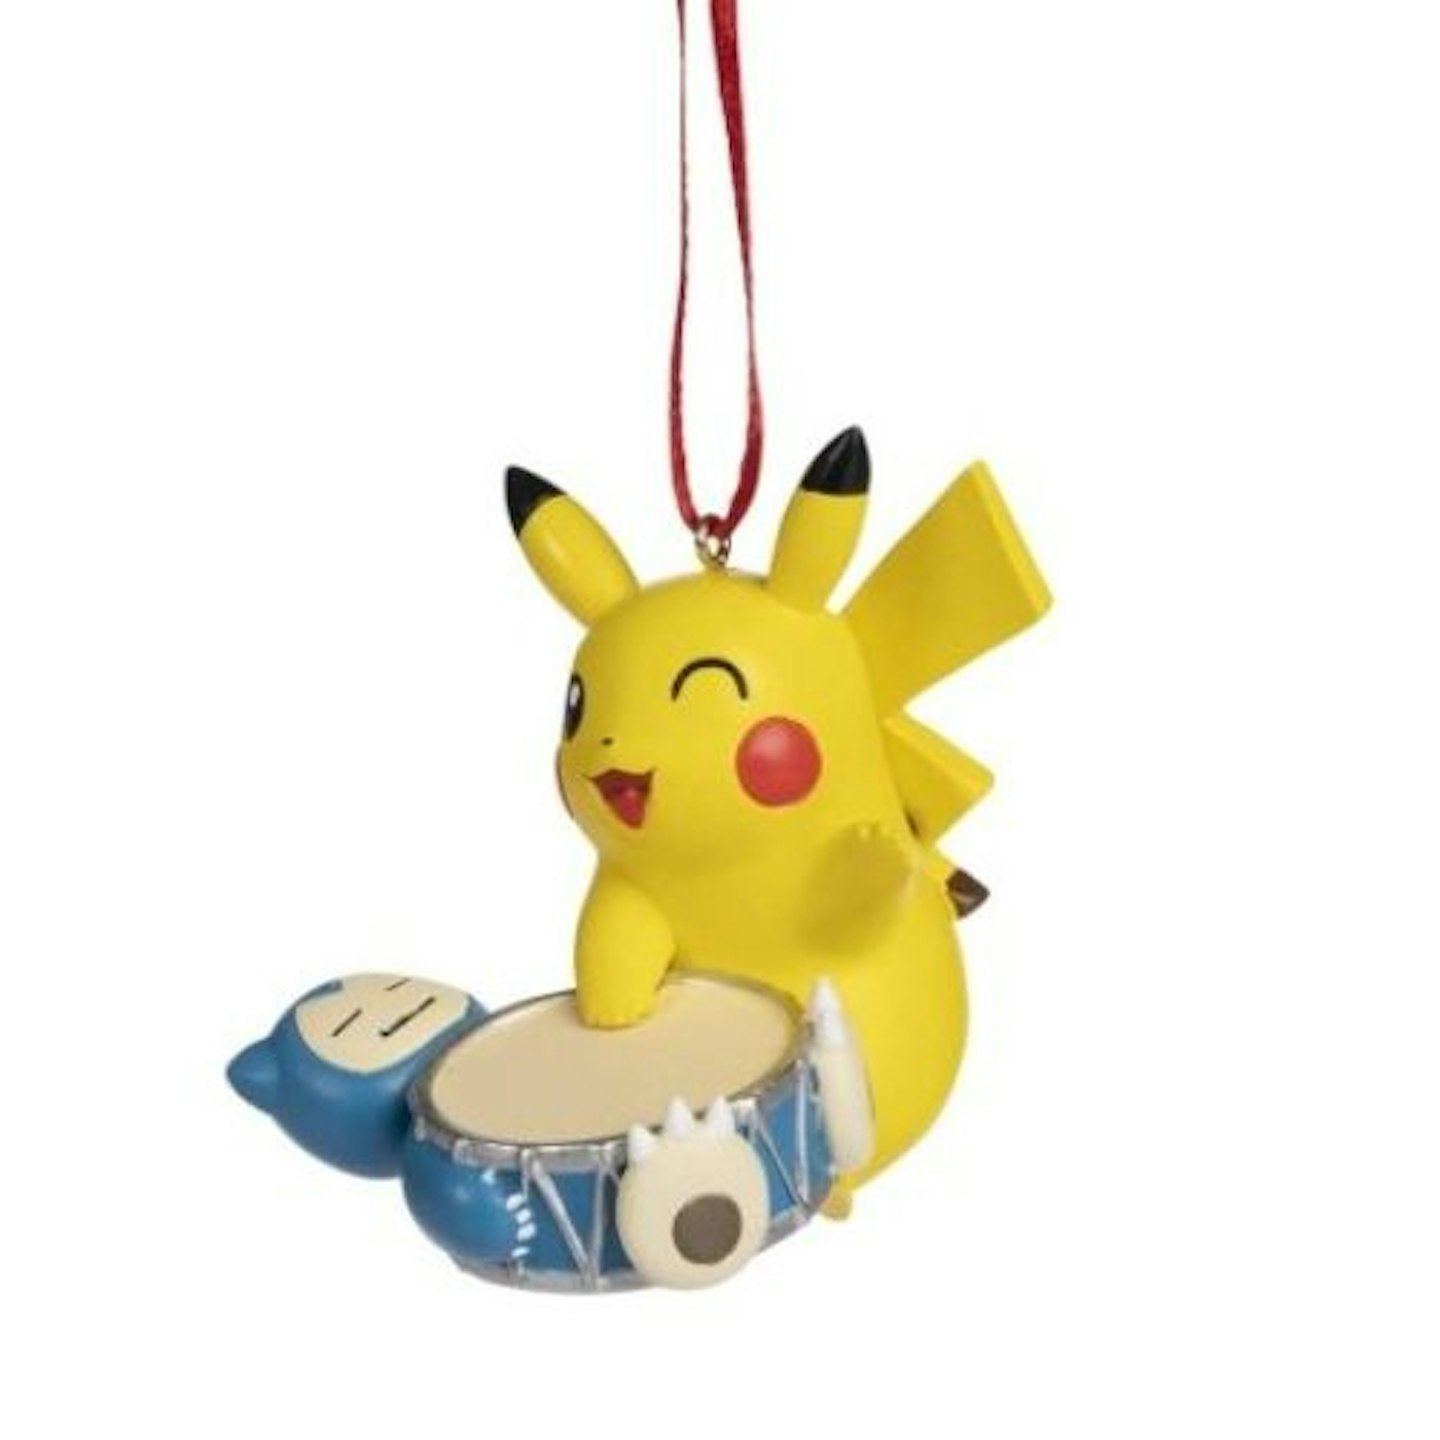 Best Pokemon Christmas gifts Pikachu Together for the Holidays Ornament